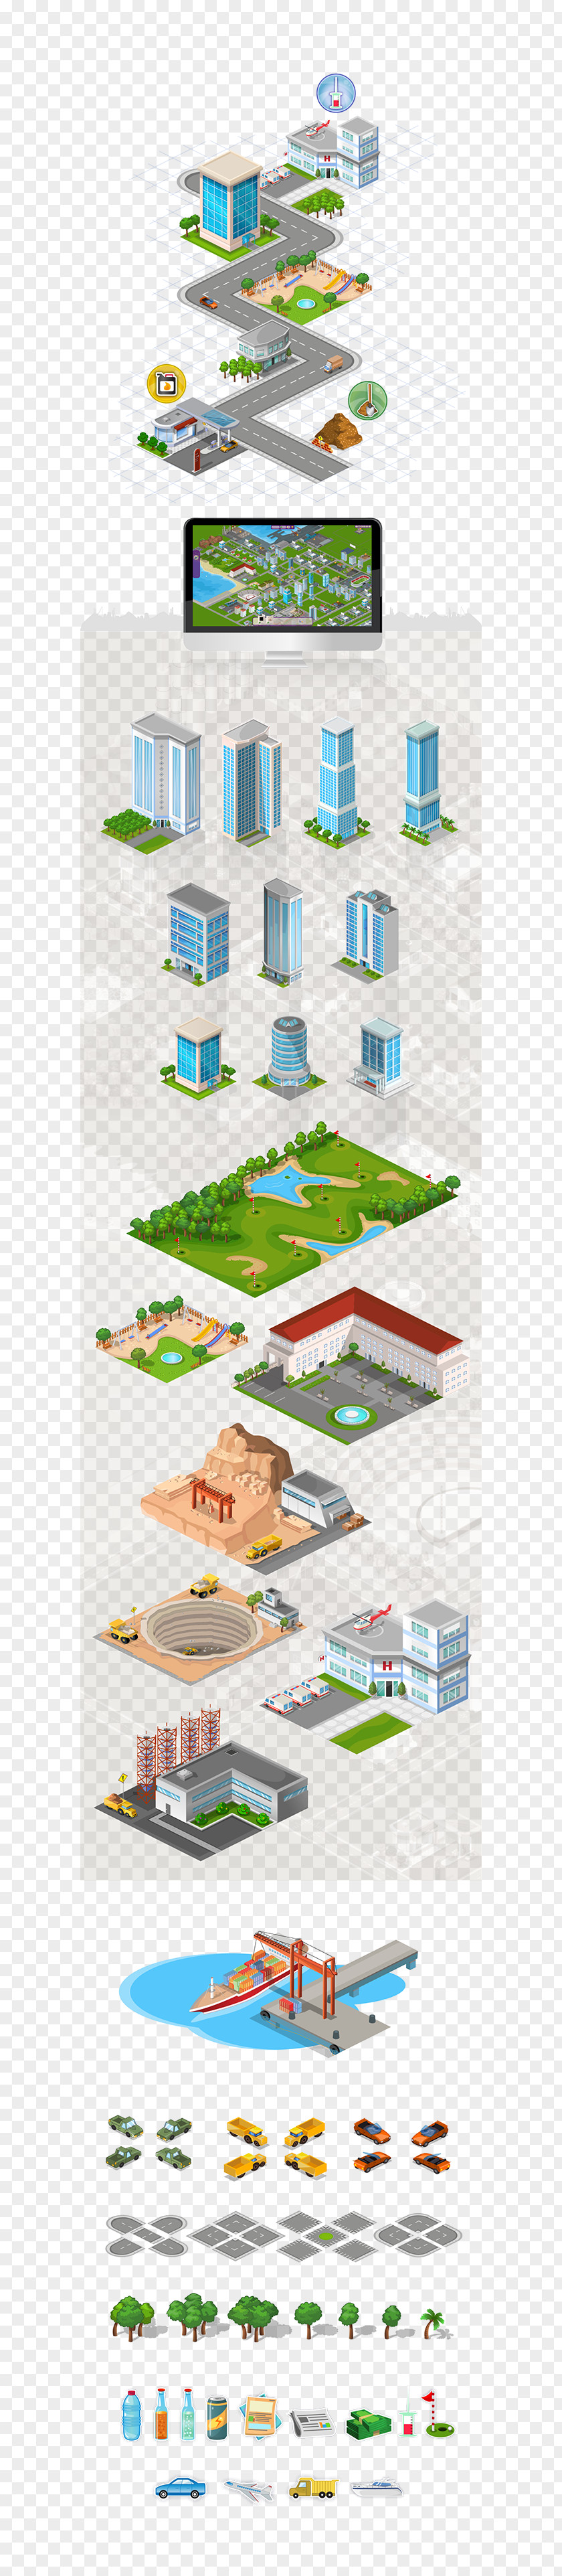 Design Isometric Graphics In Video Games And Pixel Art Graphic PNG